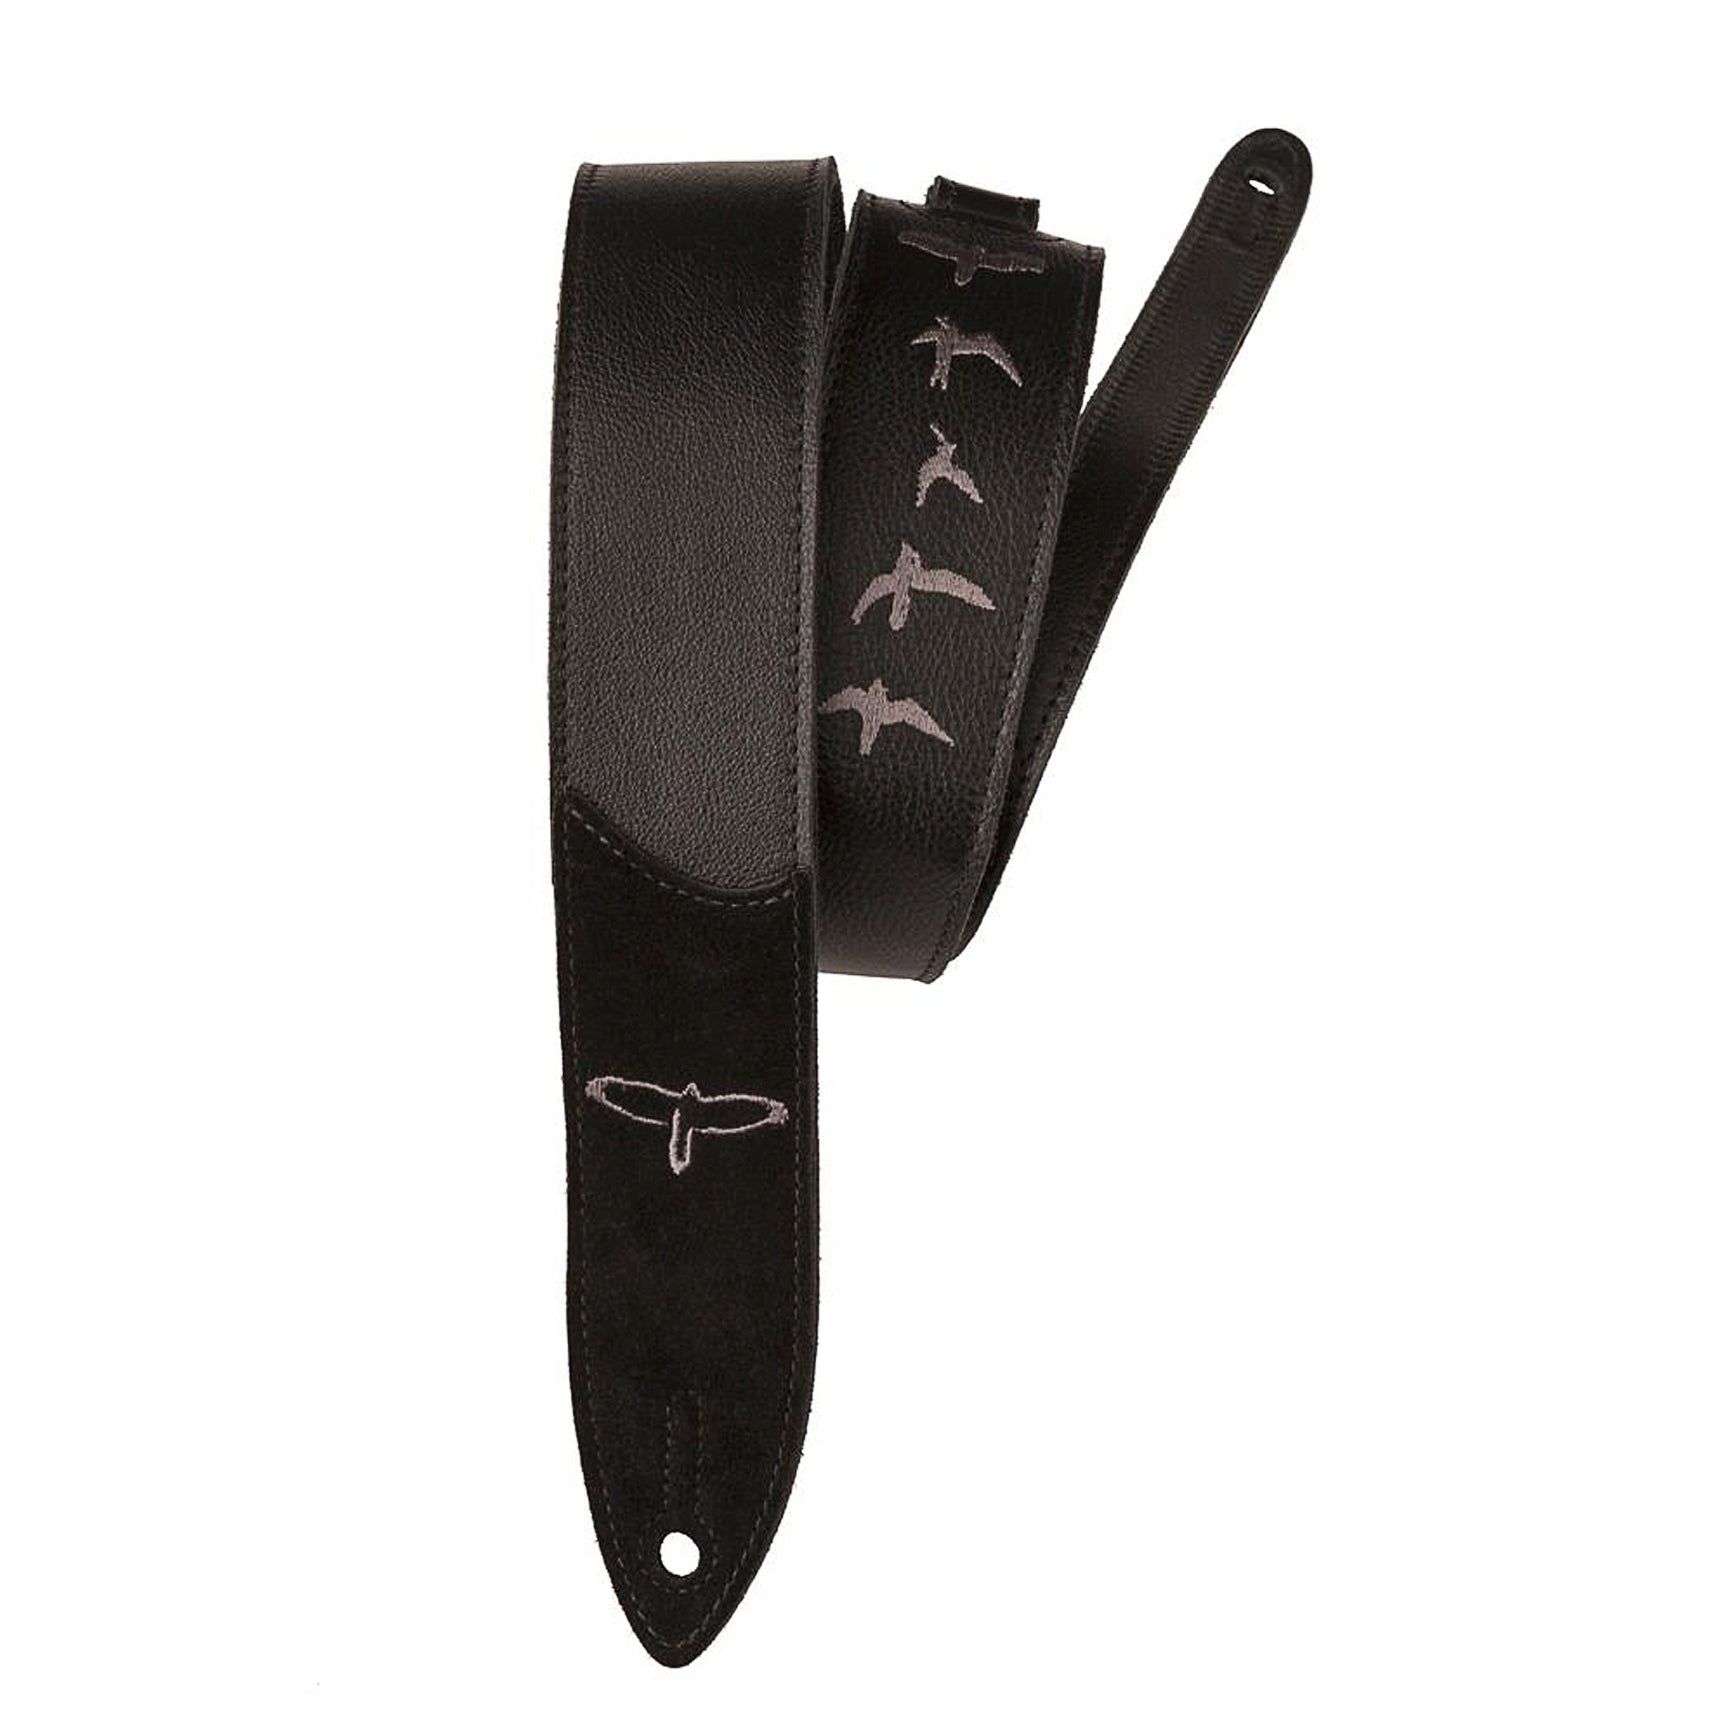 Paul Reed Smith (PRS) Premium Leather Strap Birds Embroidery Black